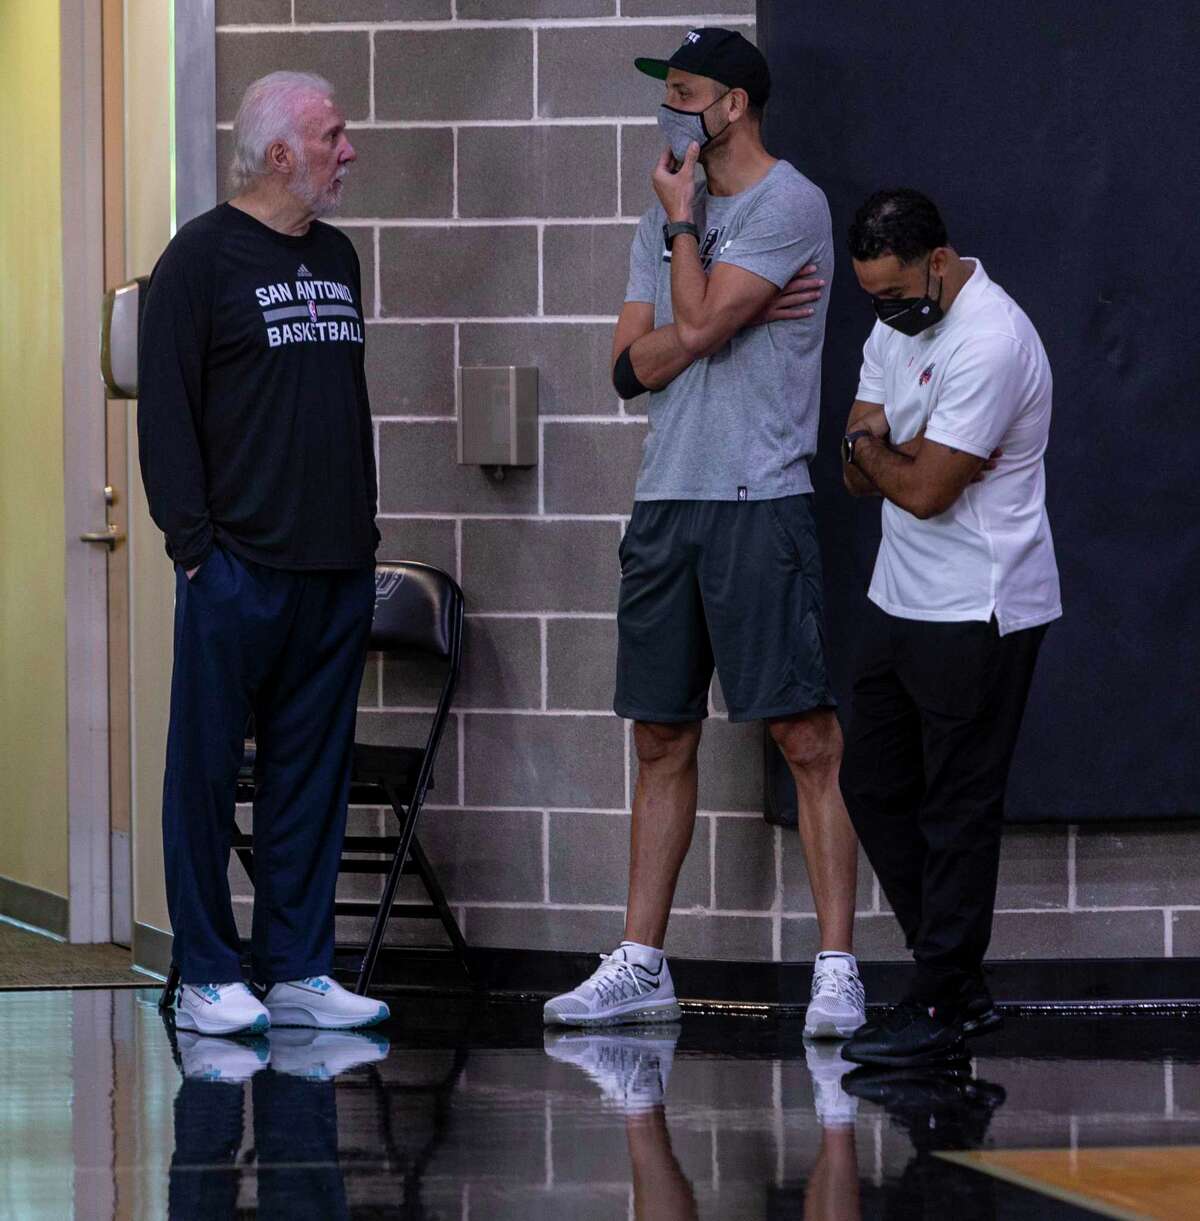 Spurs coach Gregg Popovich, left, talks with Manu Ginobili at the team’s media day. Popovich said Giniboli will have a wide-ranging role as special adviser to basketball operations.